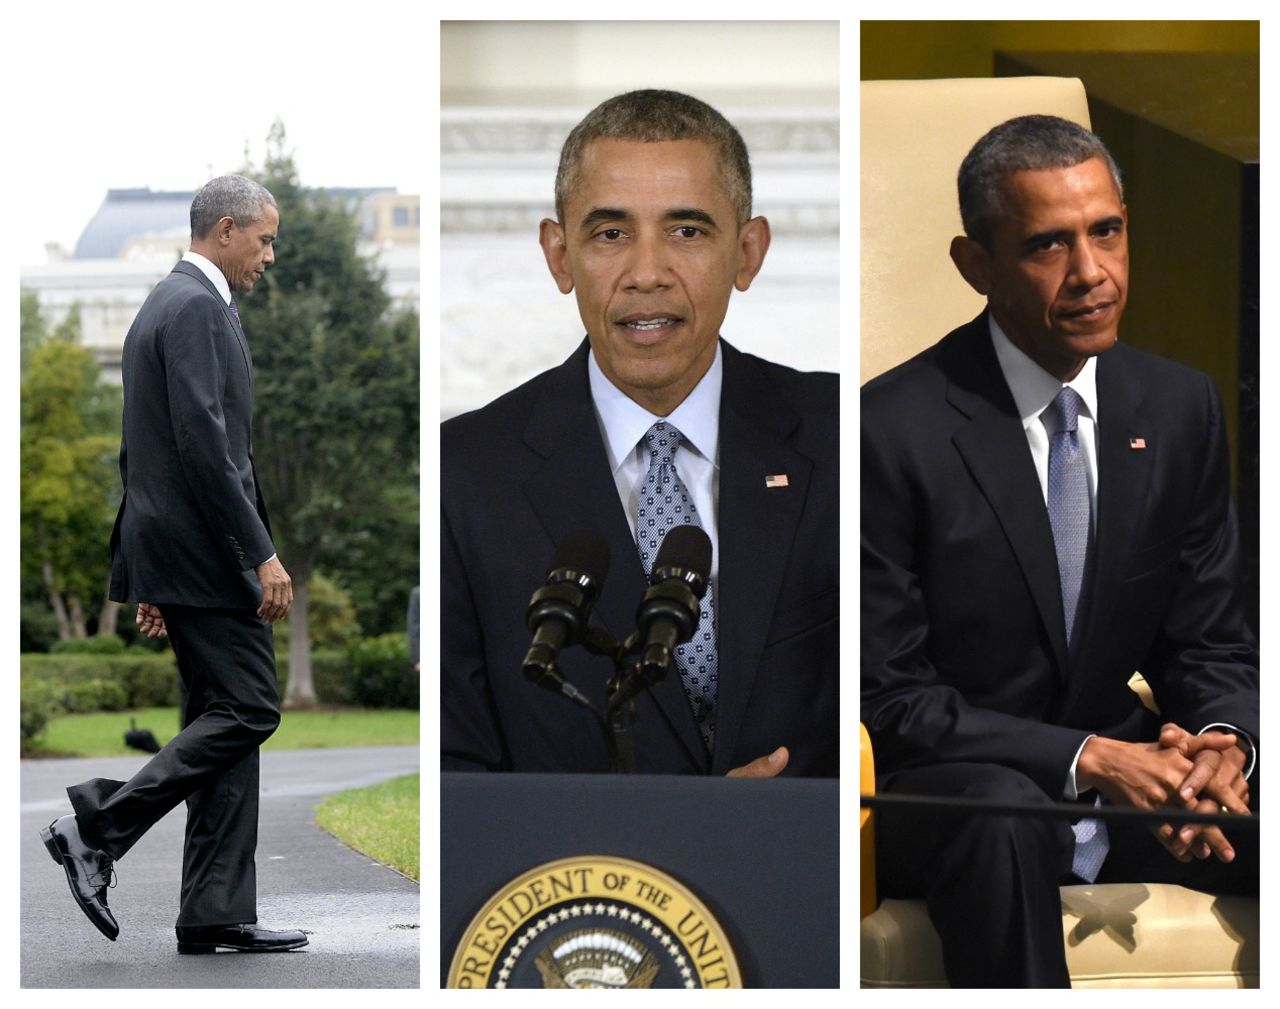 President Barack Obama sticks with dark formal wear. He told Vanity Fair in 2012: "You'll see I wear only gray or blue suits. I'm trying to pare down decisions. I don't want to make decisions about what I'm eating or wearing. Because I have too many other decisions to make."